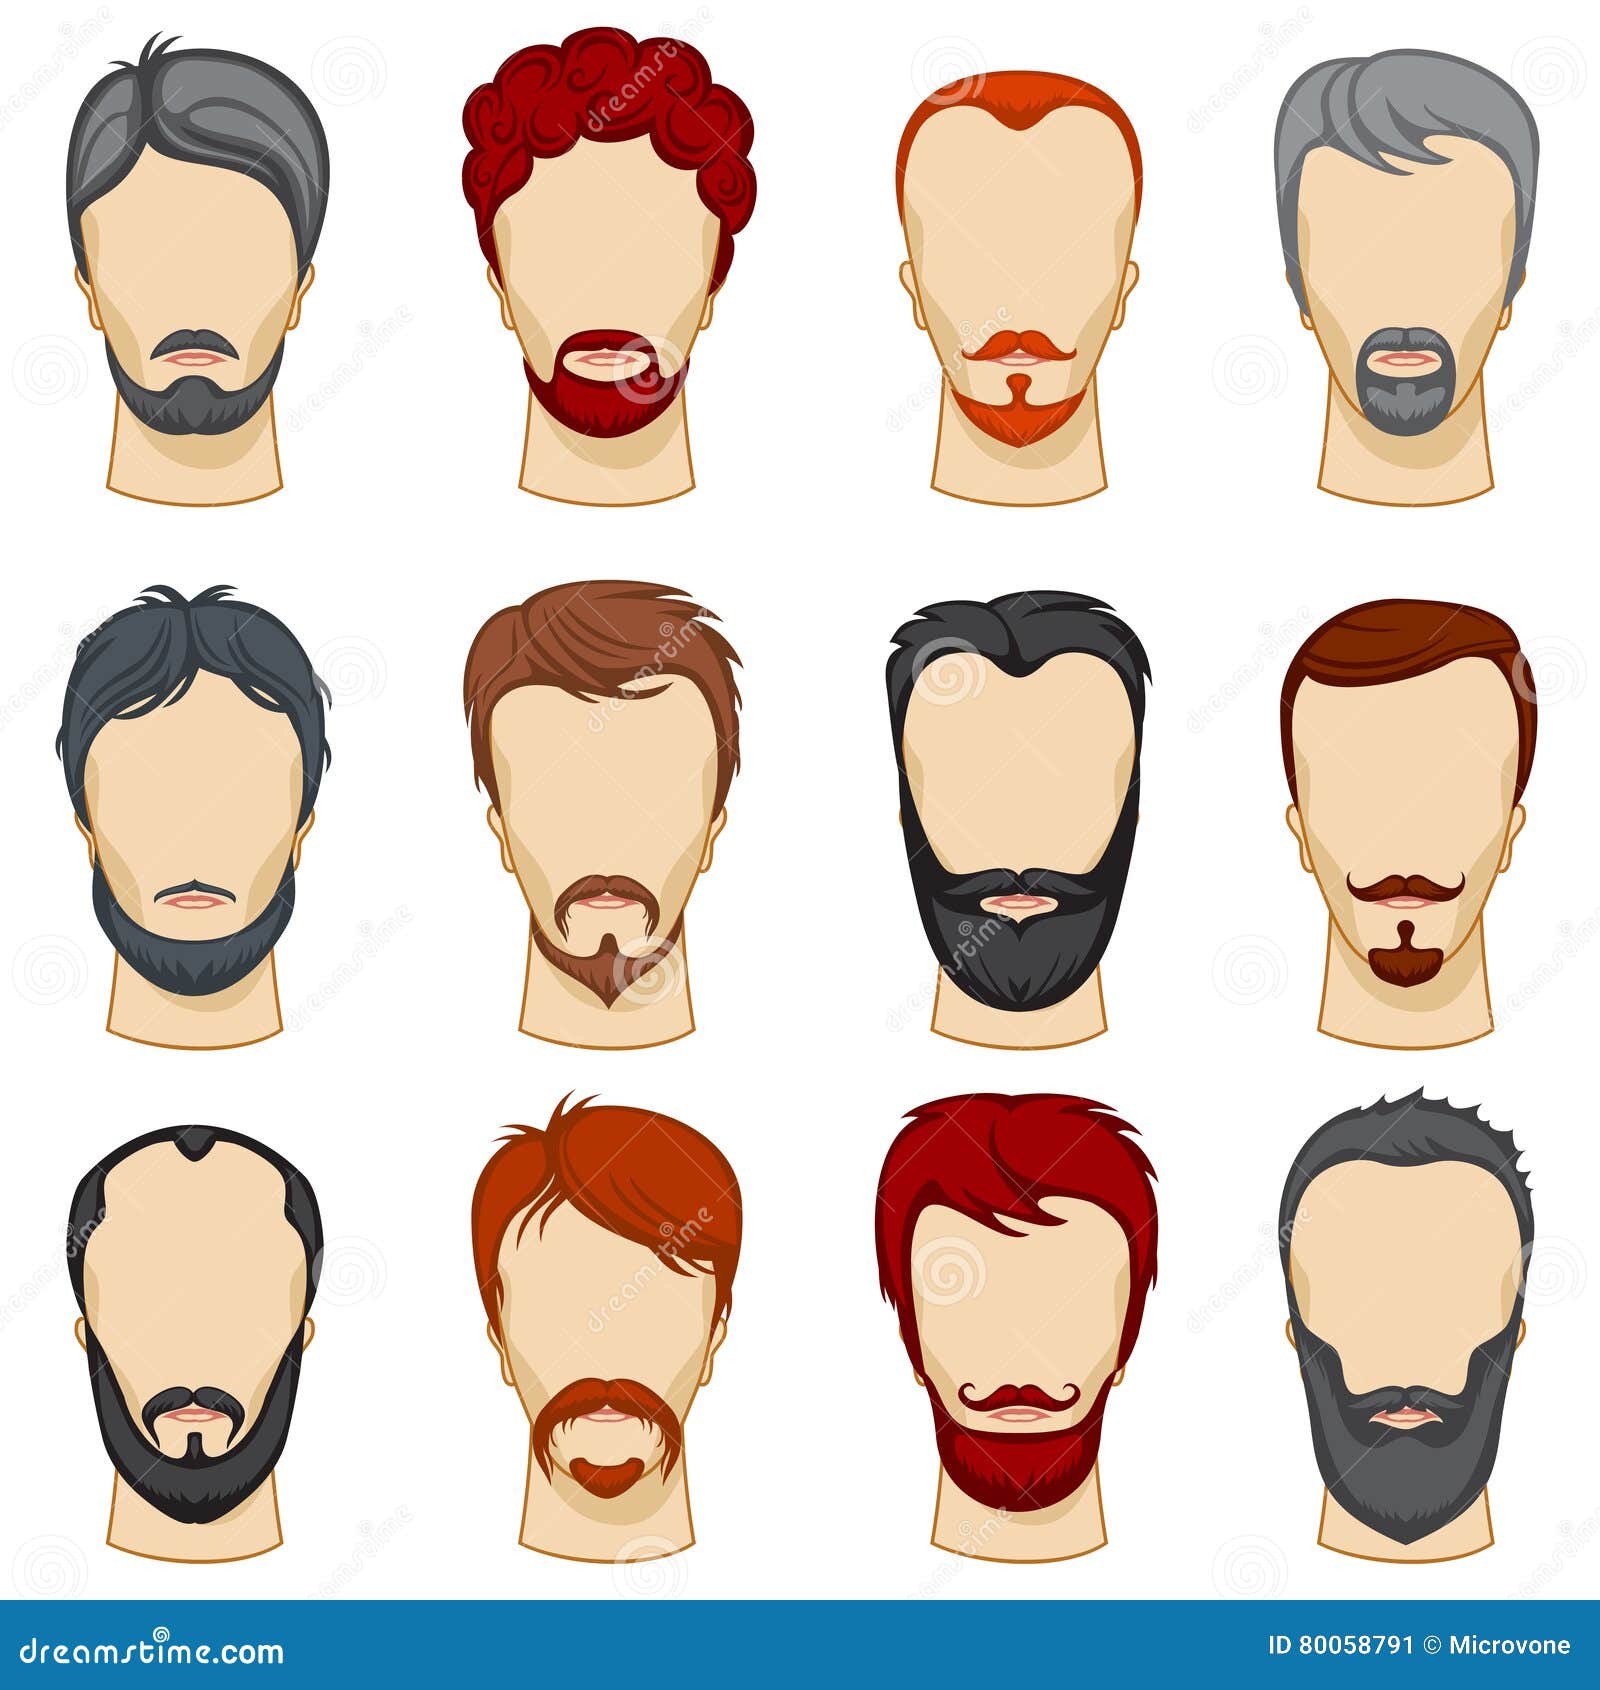 Man Cartoon Hairstyles Vector Collection Stock Vector - Illustration of